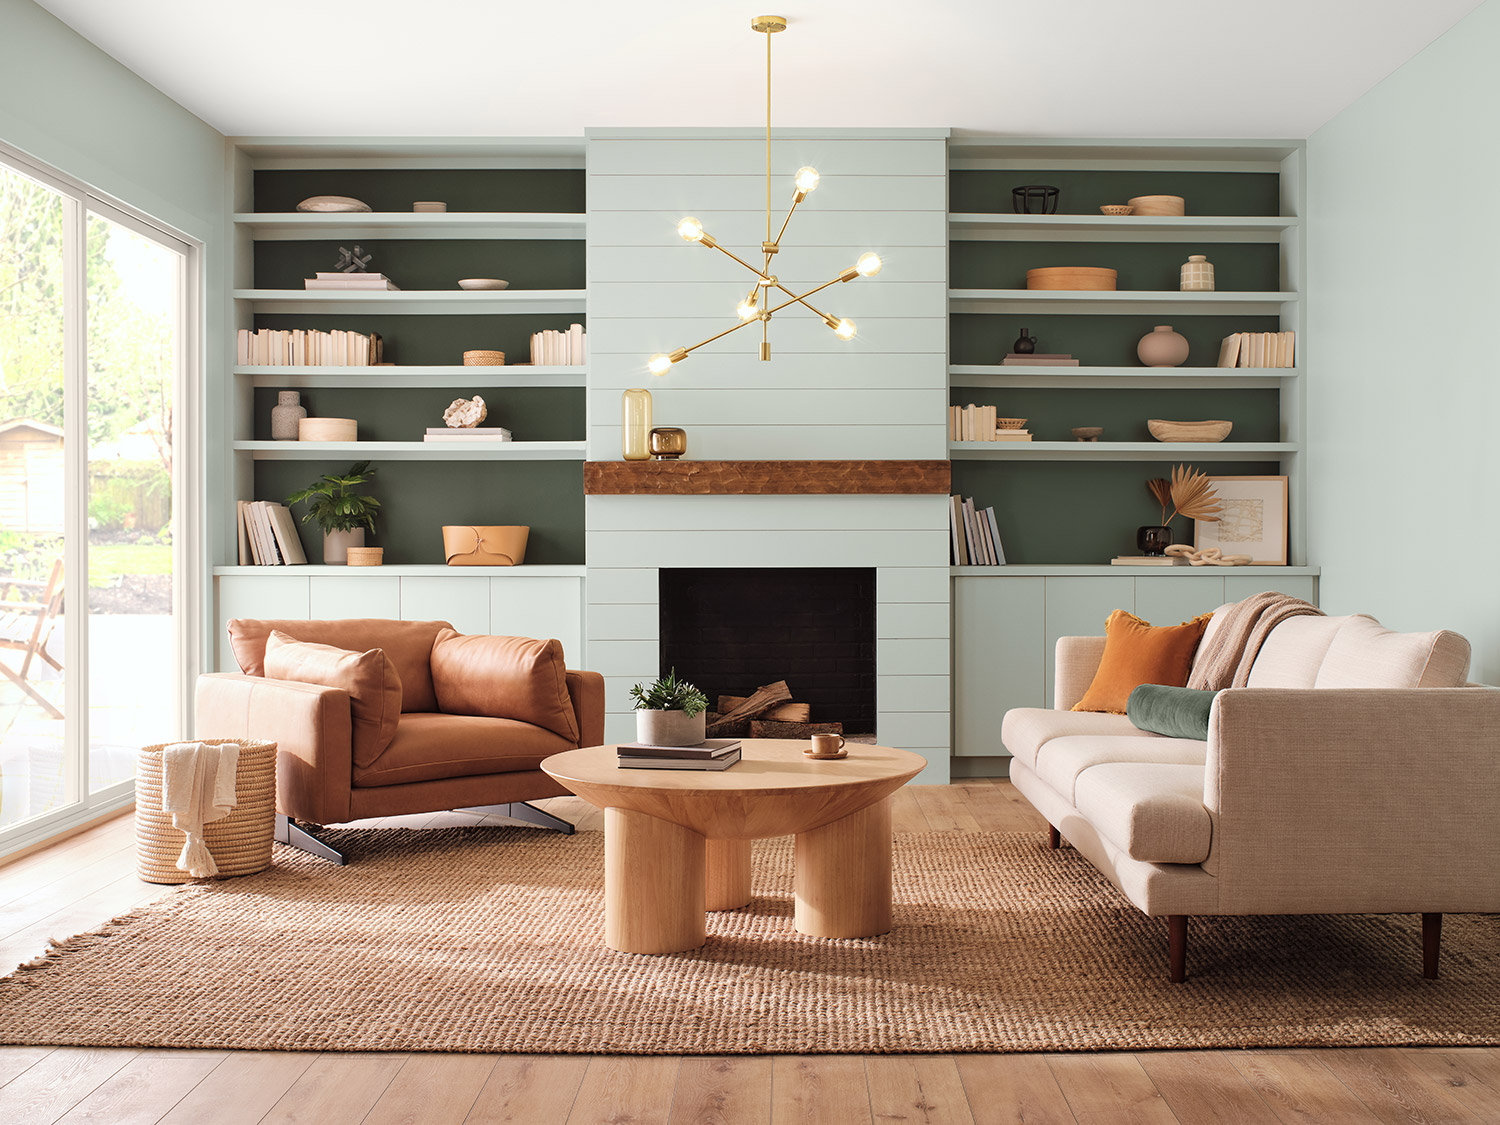 Modern living room with built in shelves framing a fireplace, beige and brown couches, and minimalist decorations. Walls and Shelves painted Copen Blue SW 0068